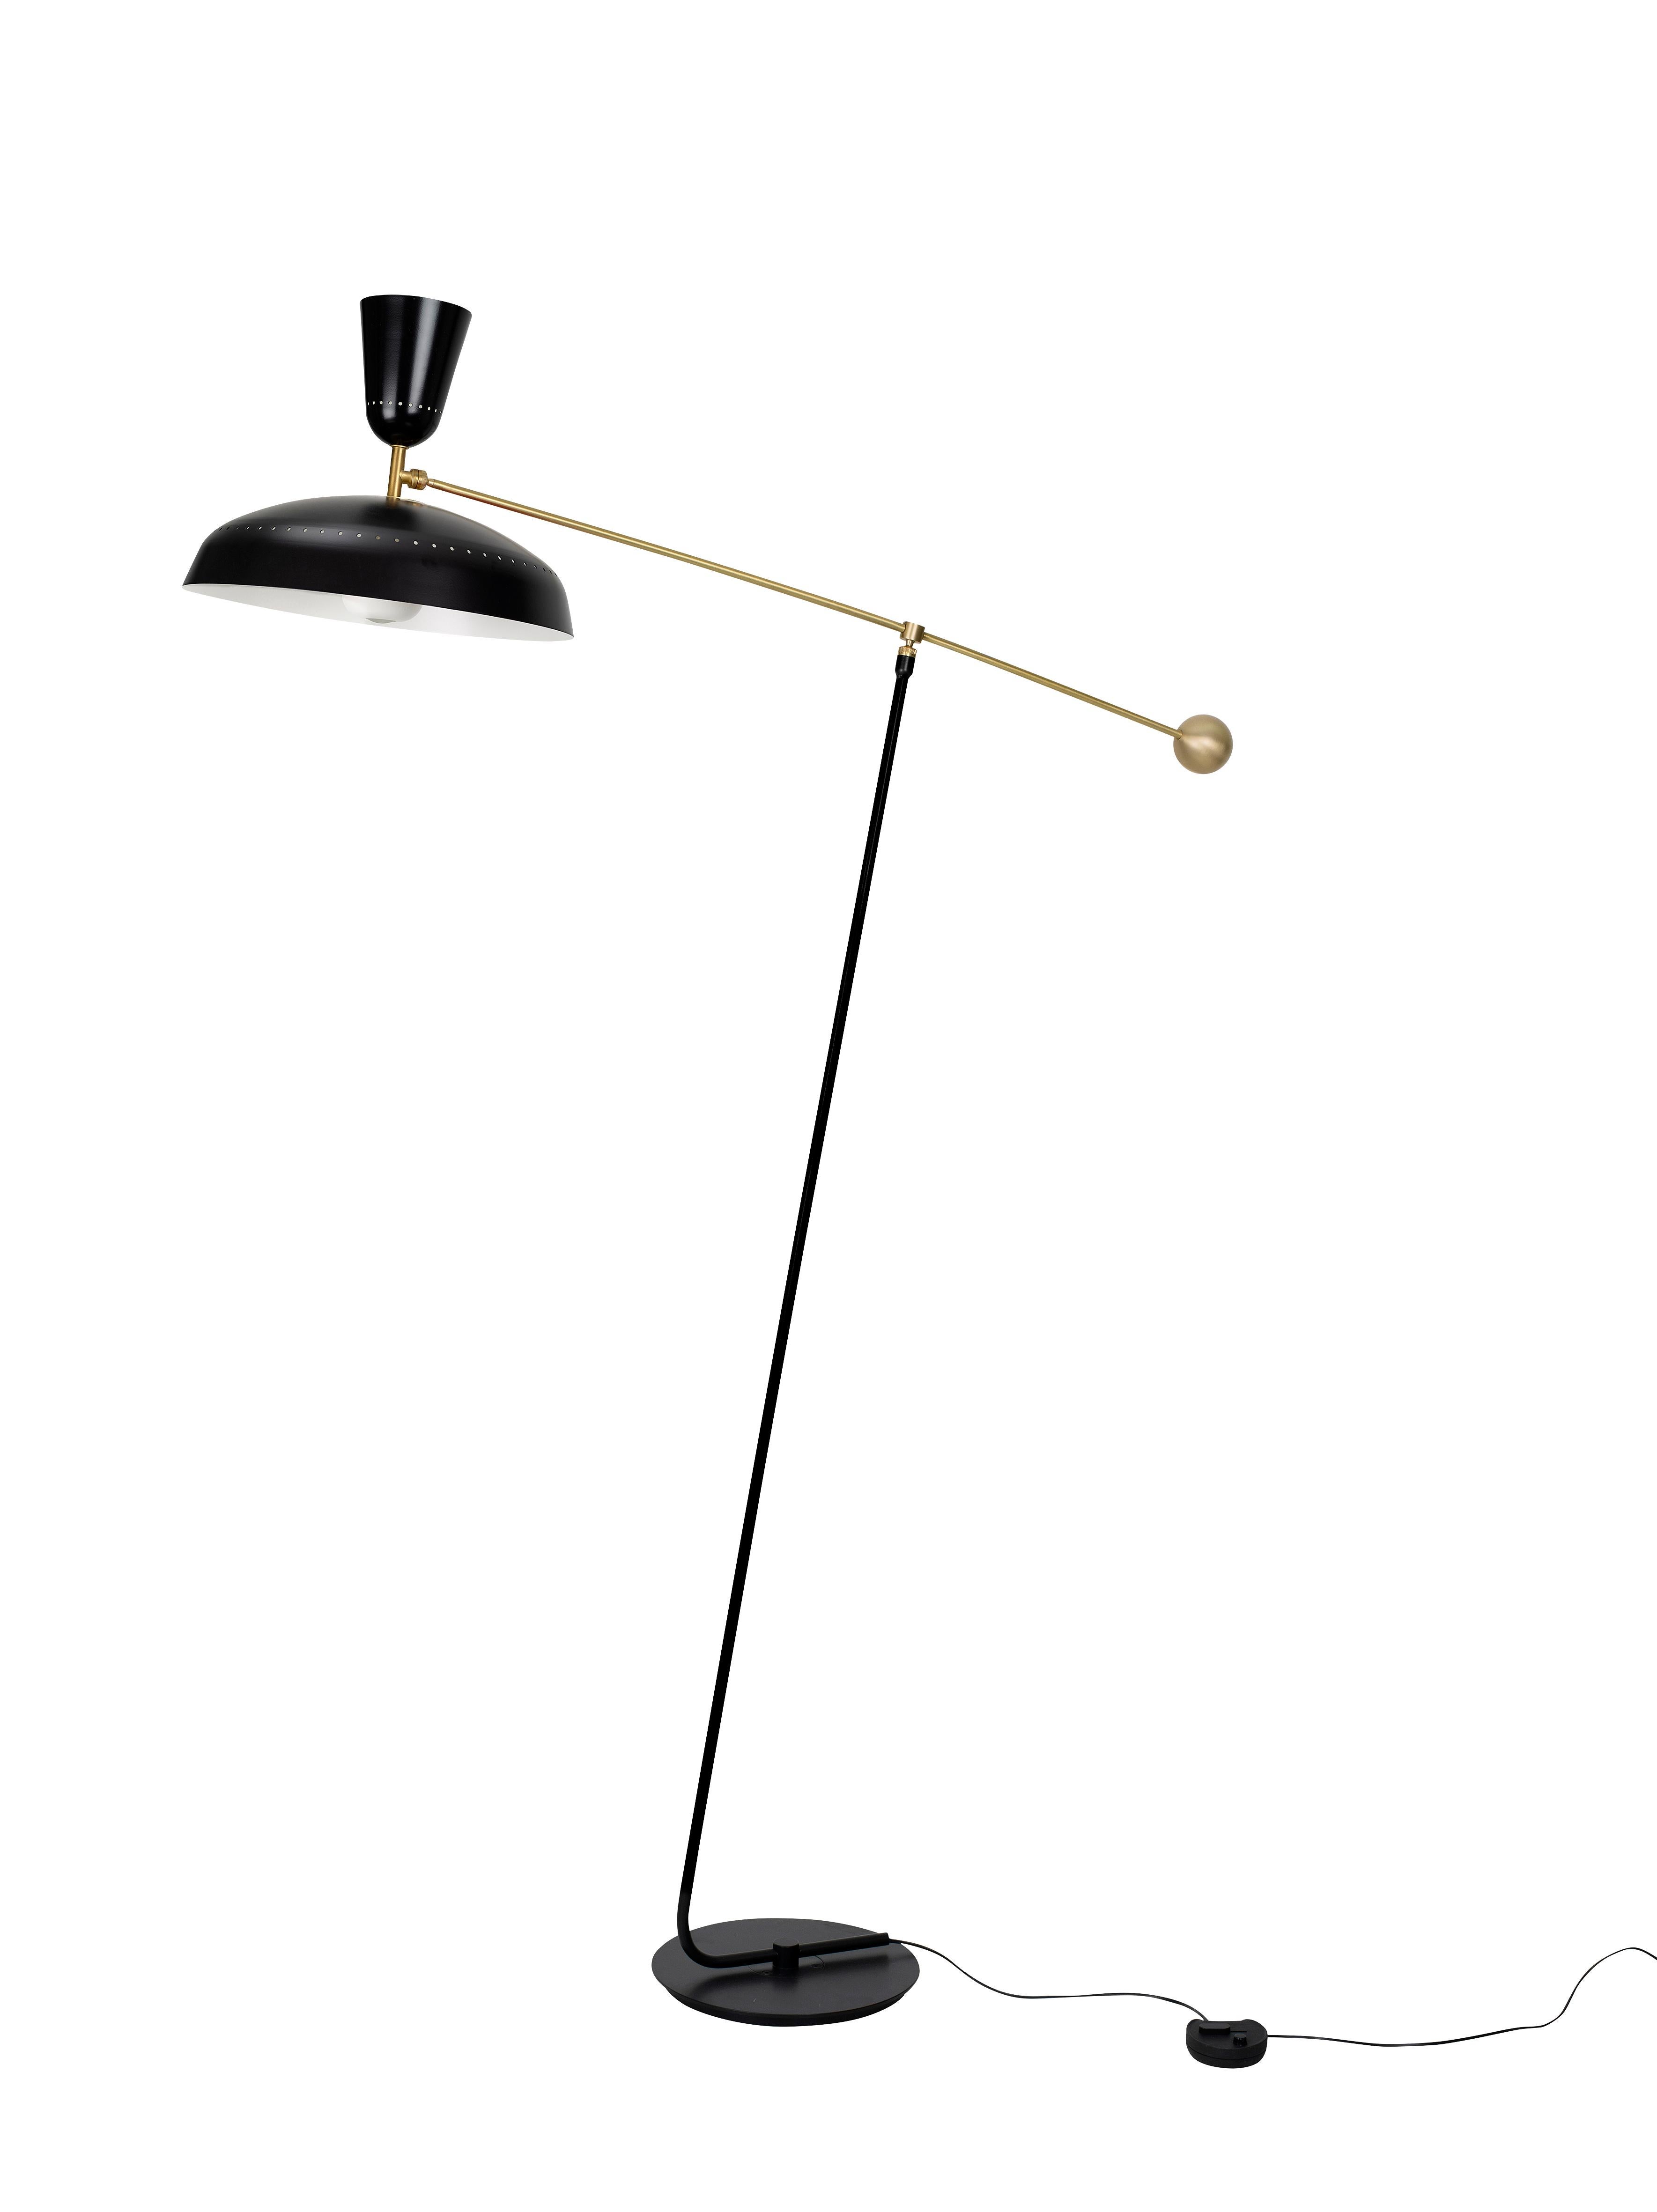 Large Pierre Guariche 'G1' Floor Lamp for Sammode Studio in Chalk For Sale 2